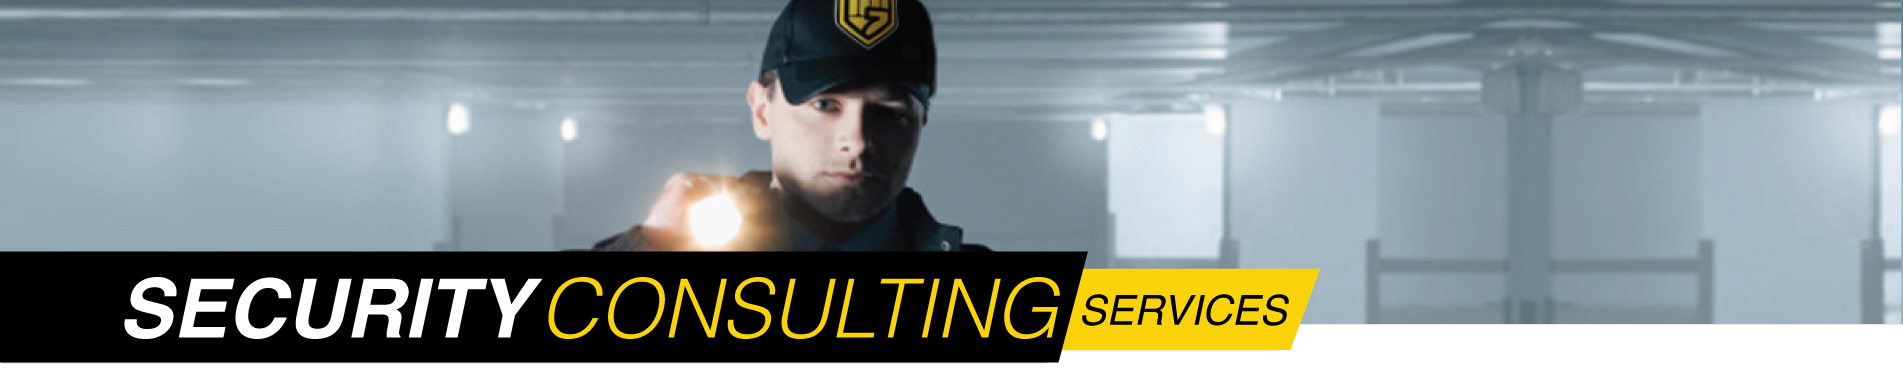 Houston area security consulting services